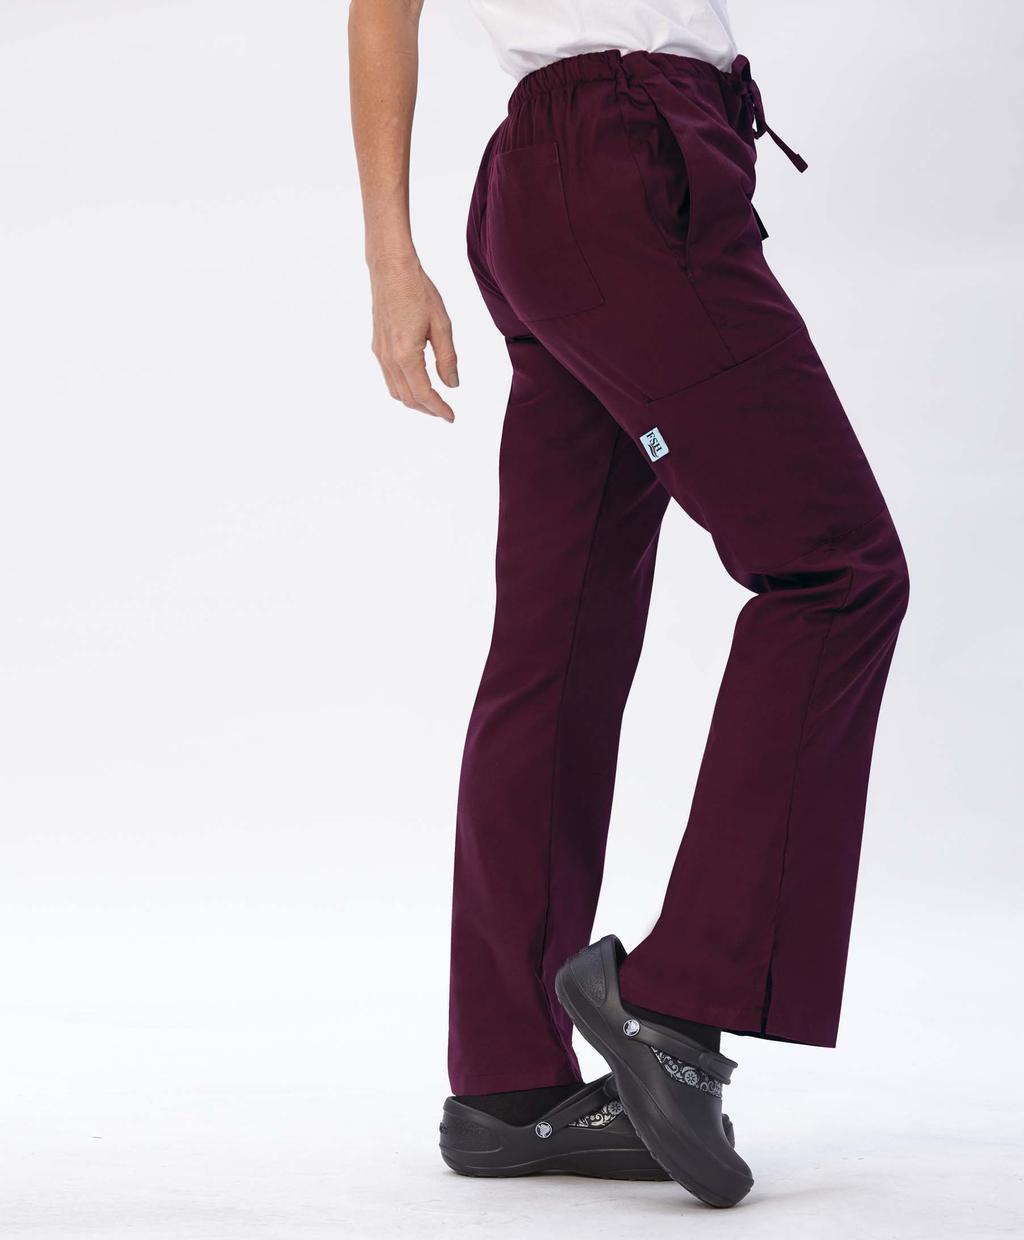 WOMEN S FLARE CARGO PANTS Polyester / Cotton See Style Guide Page 45 8093 Flare Cargo Pants